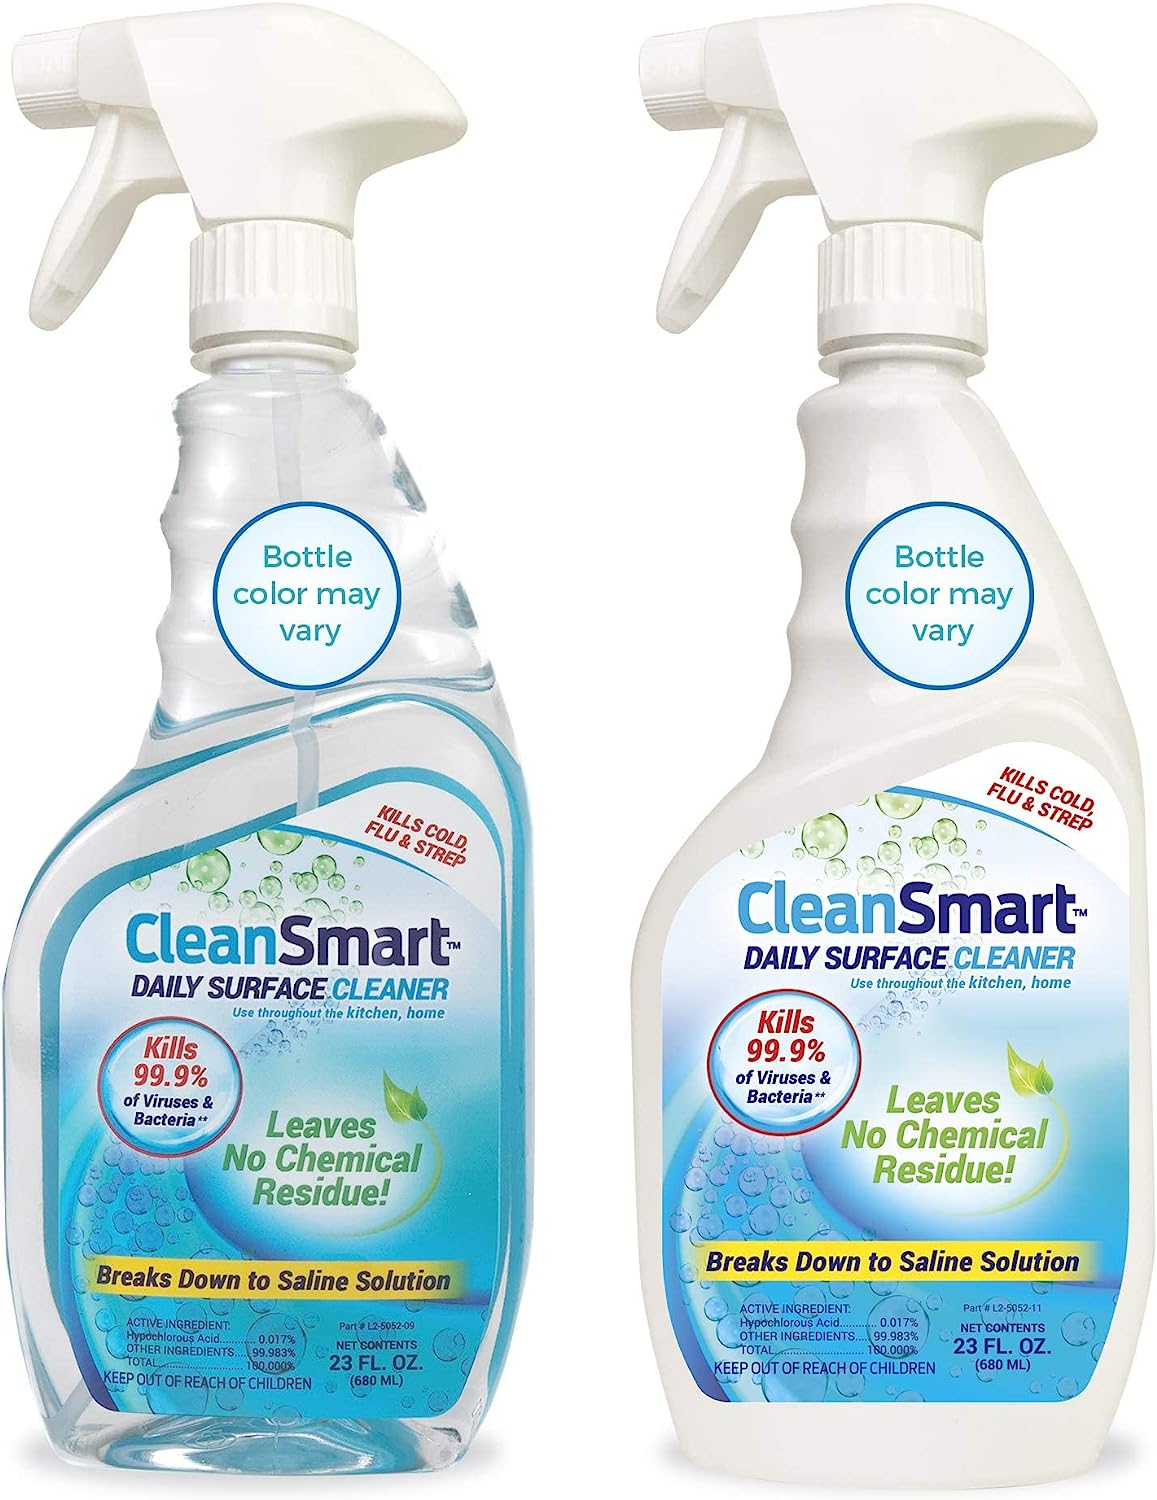 CleanSmart Daily Surface Cleaner and Pet-safe [...]